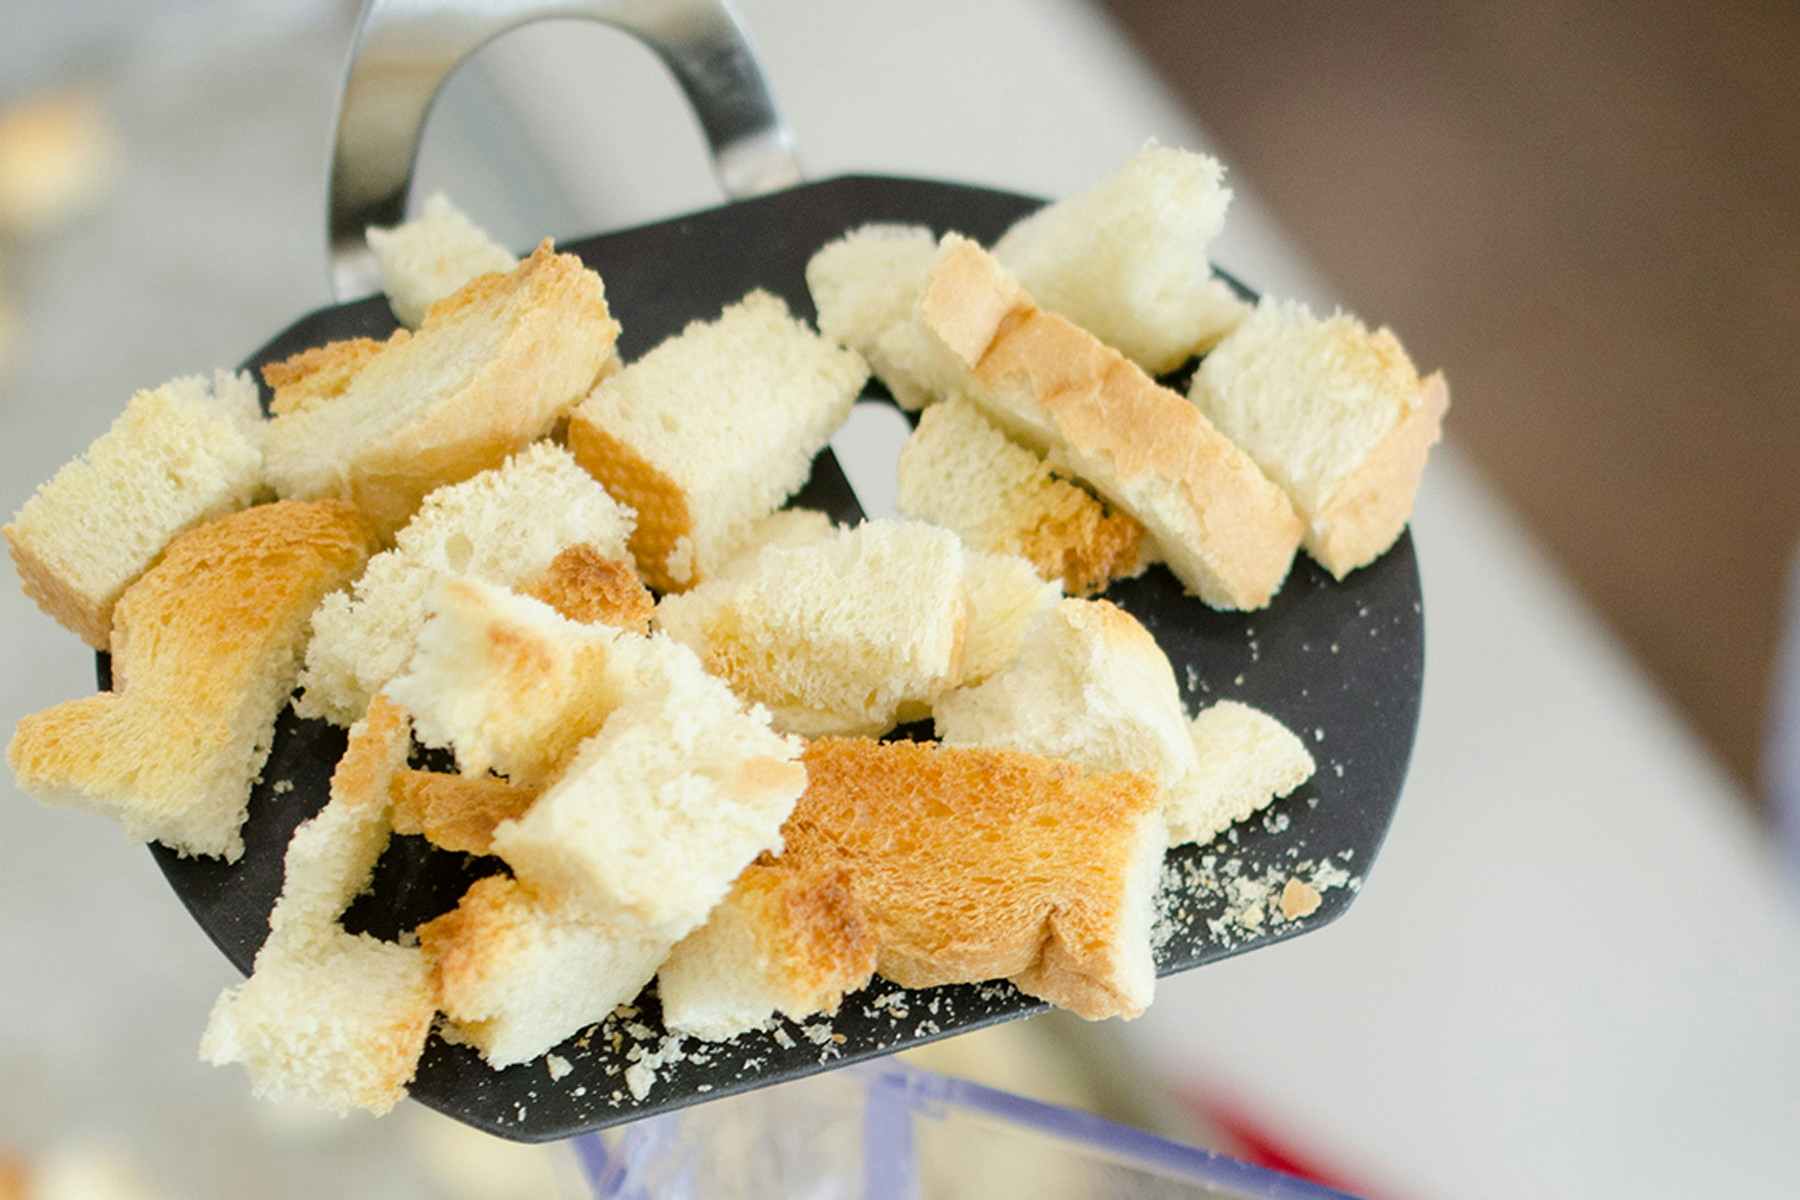 Make croutons instead of buying them.